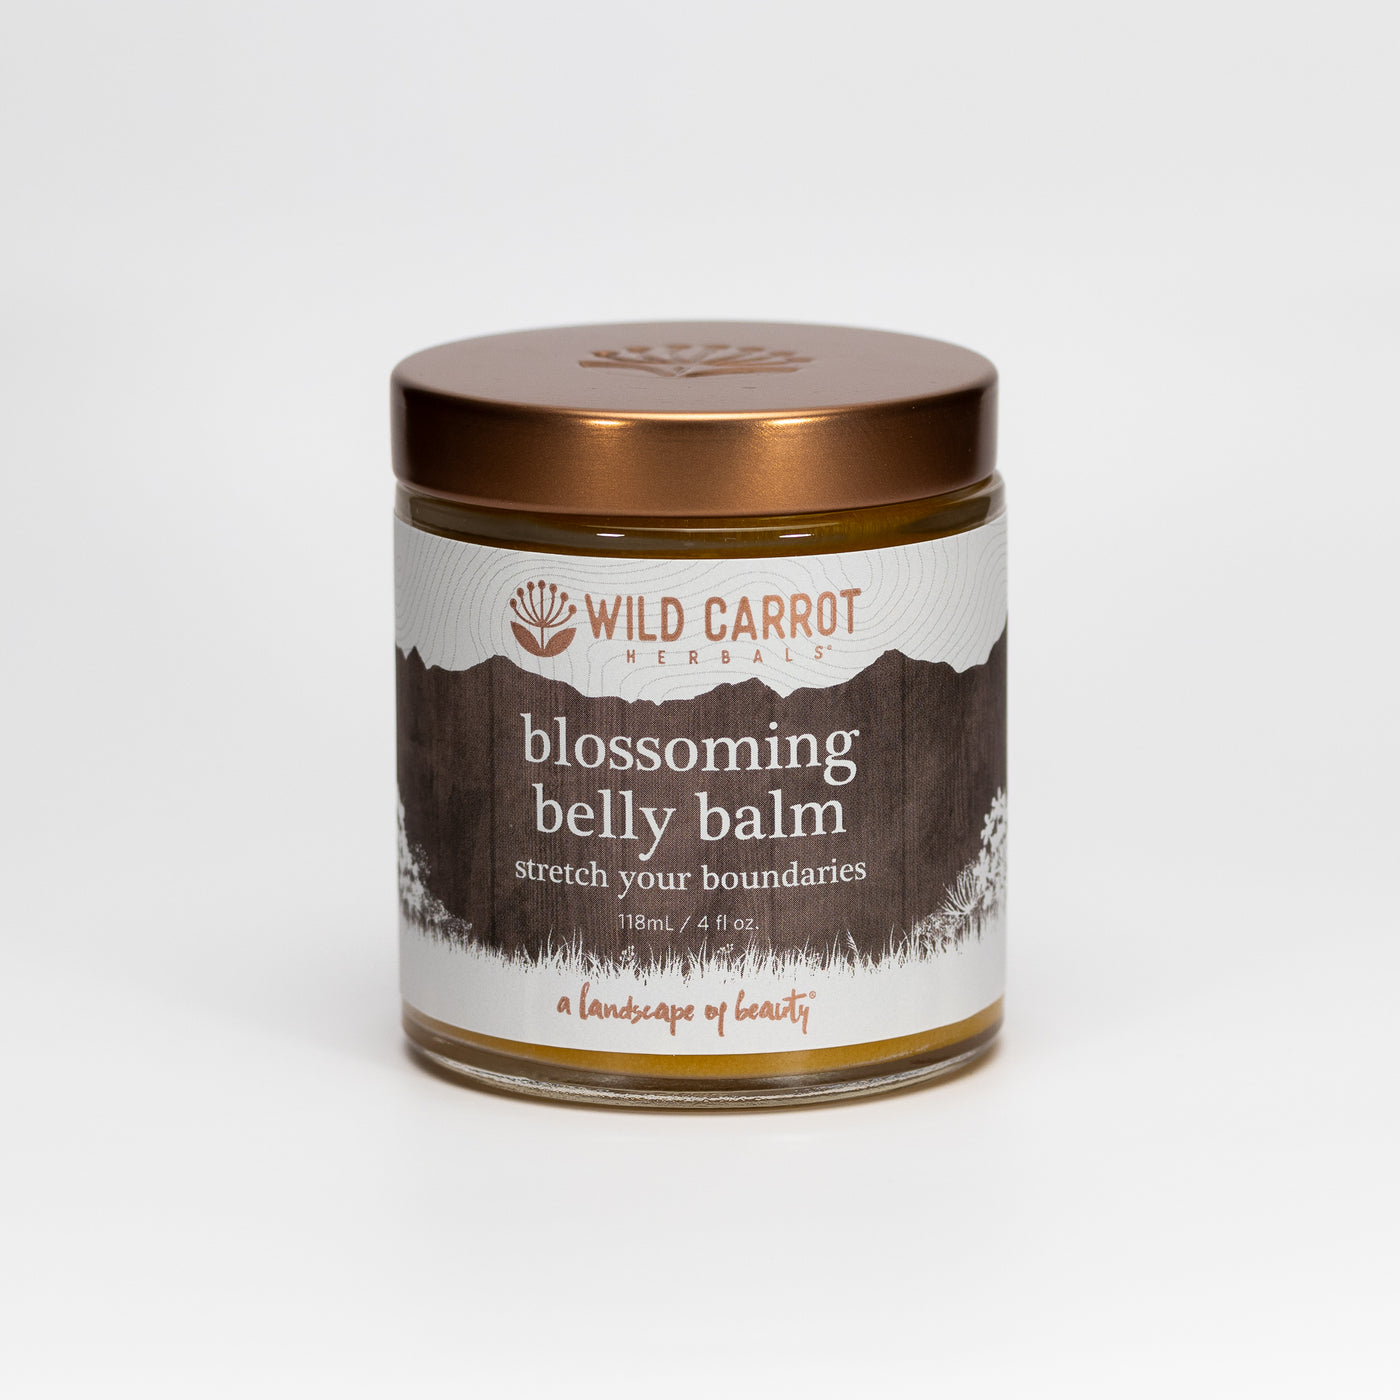 Blossoming Belly Balm